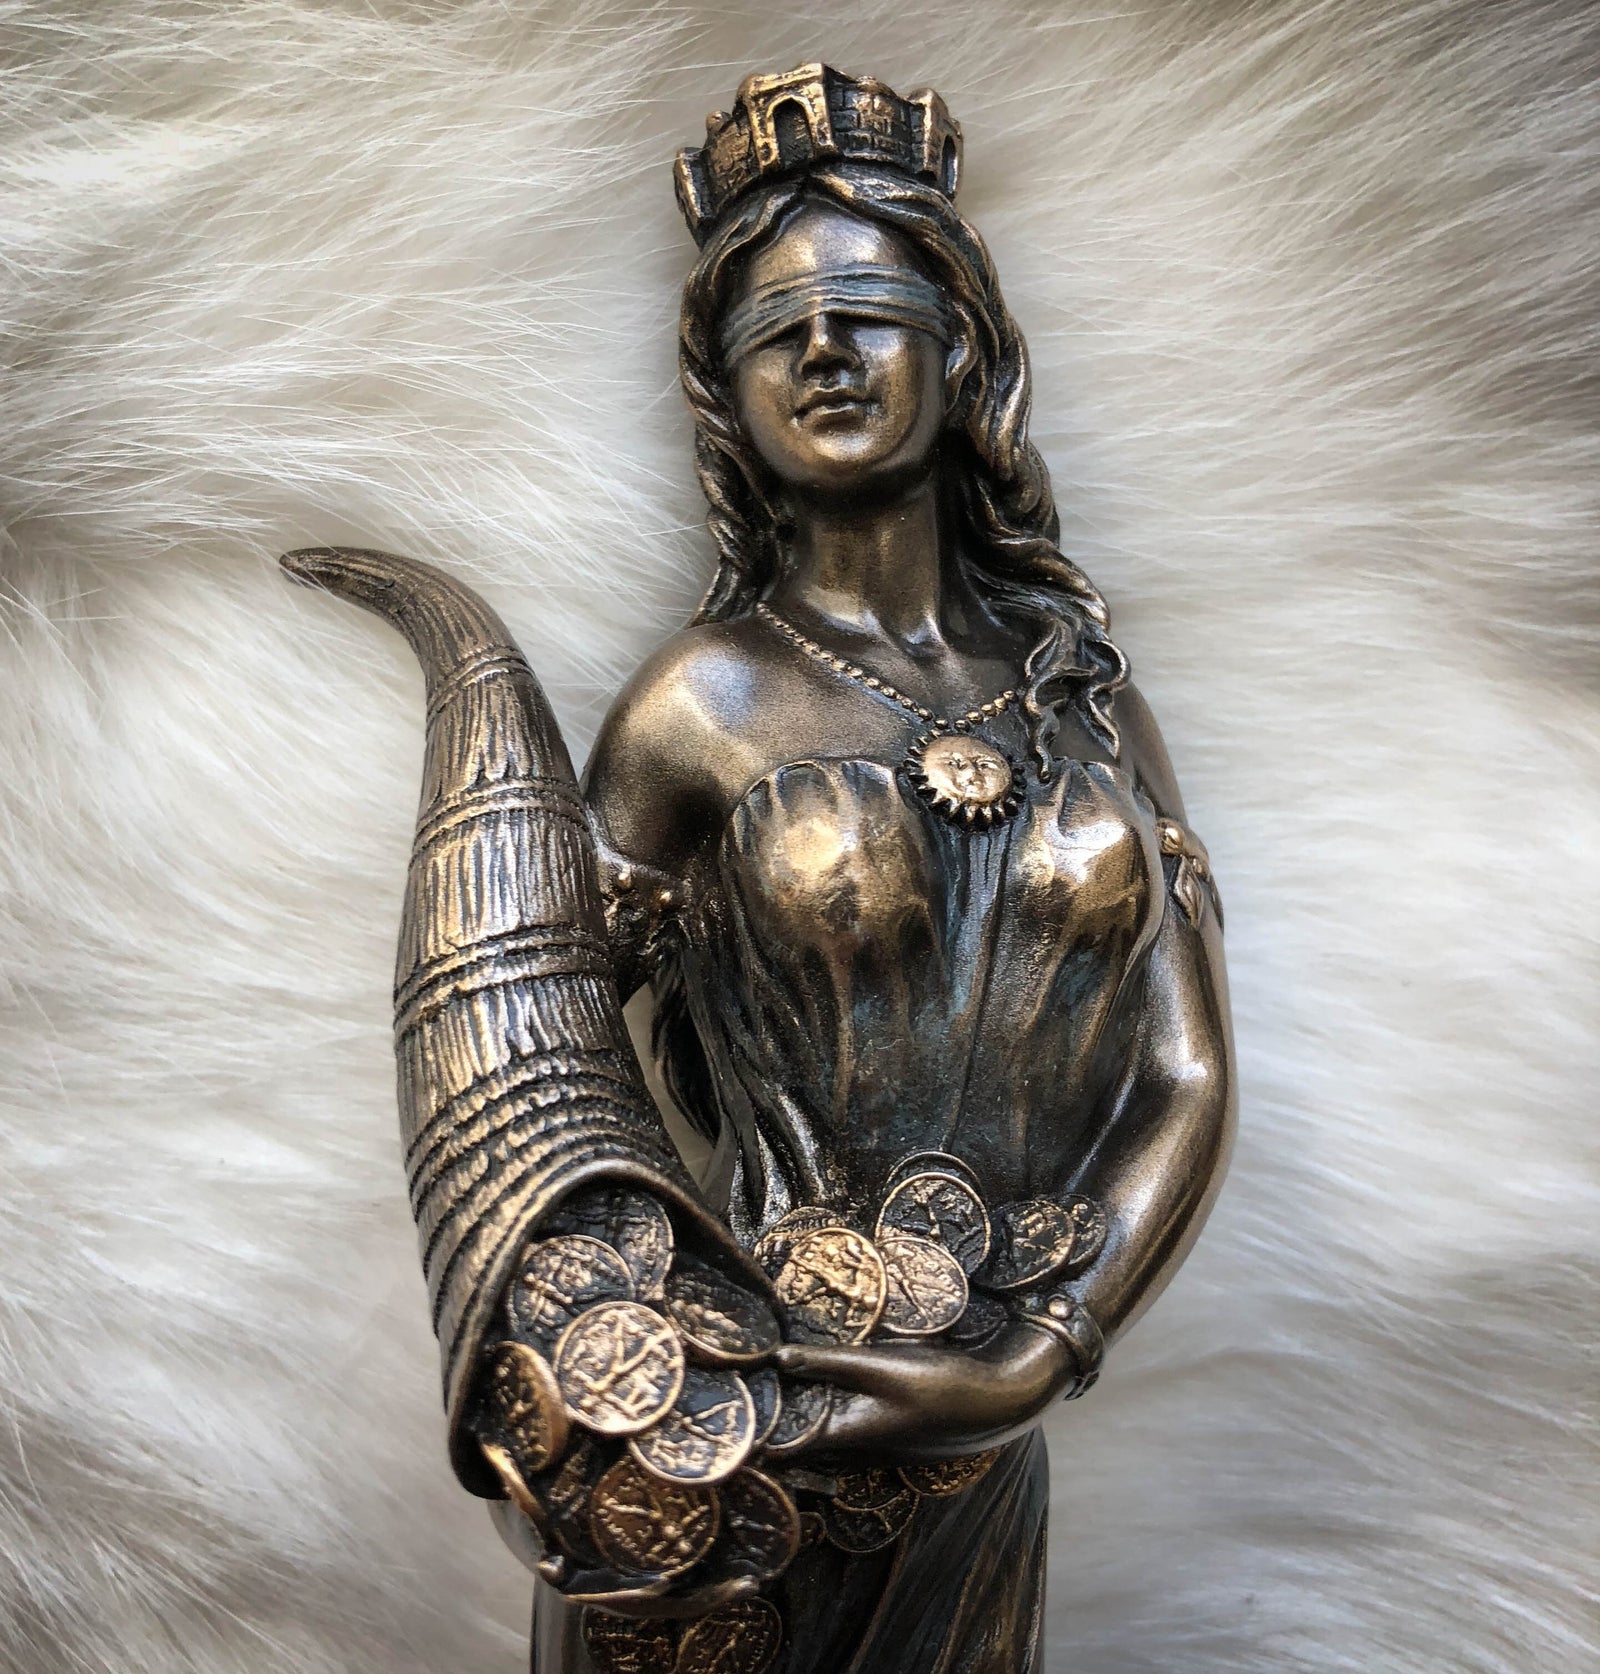 Fortuna - Goddess of Luck, Chance and Fate